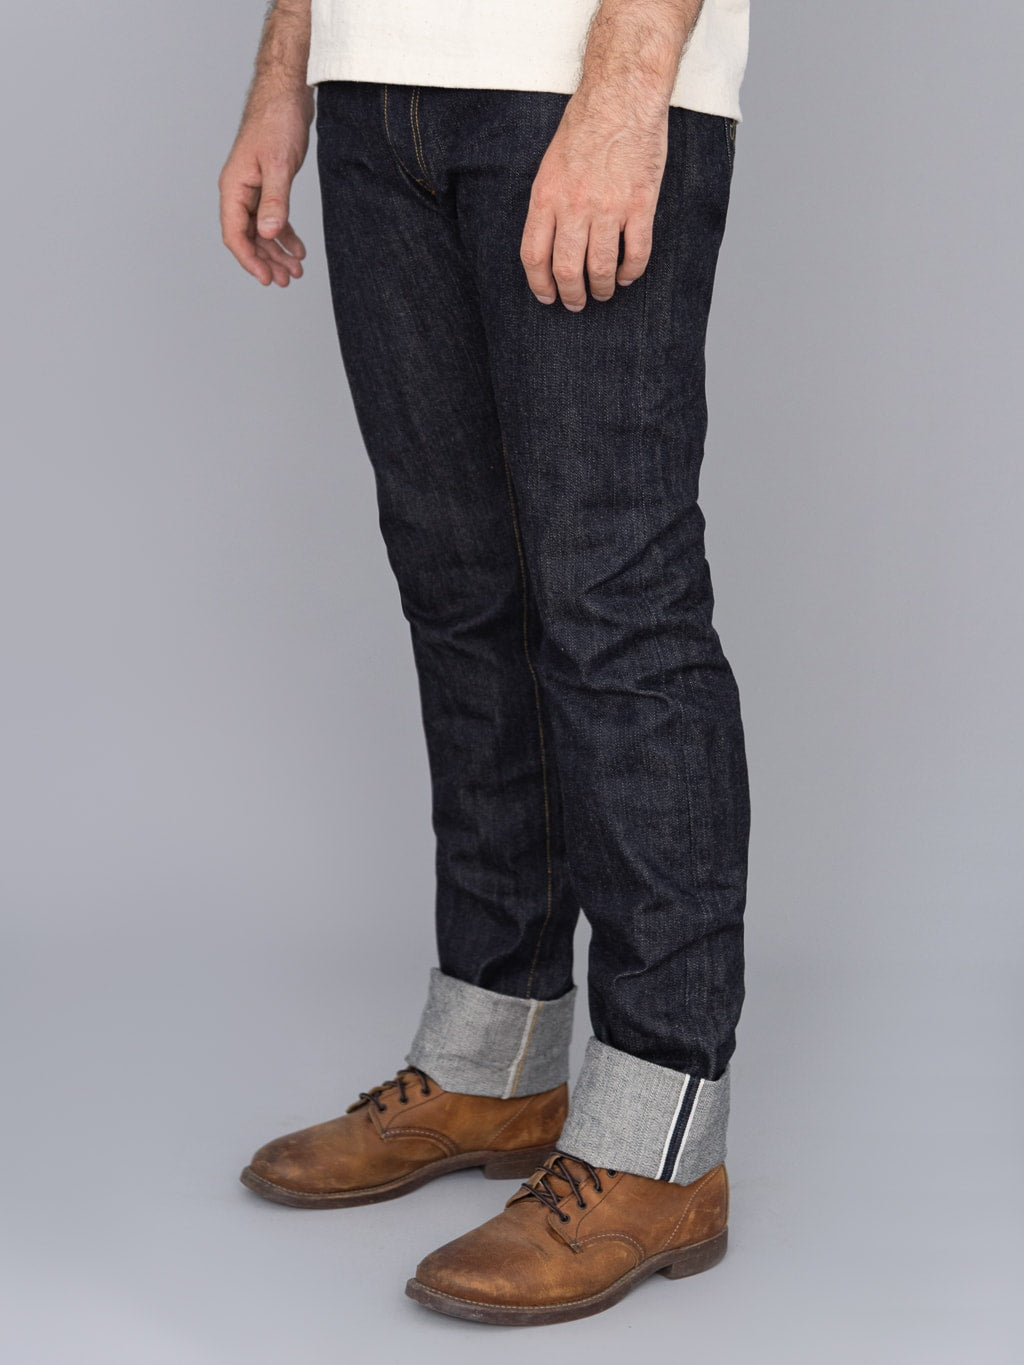 The Flat Head 3002 14.5oz Slim Tapered selvedge Jeans side fit